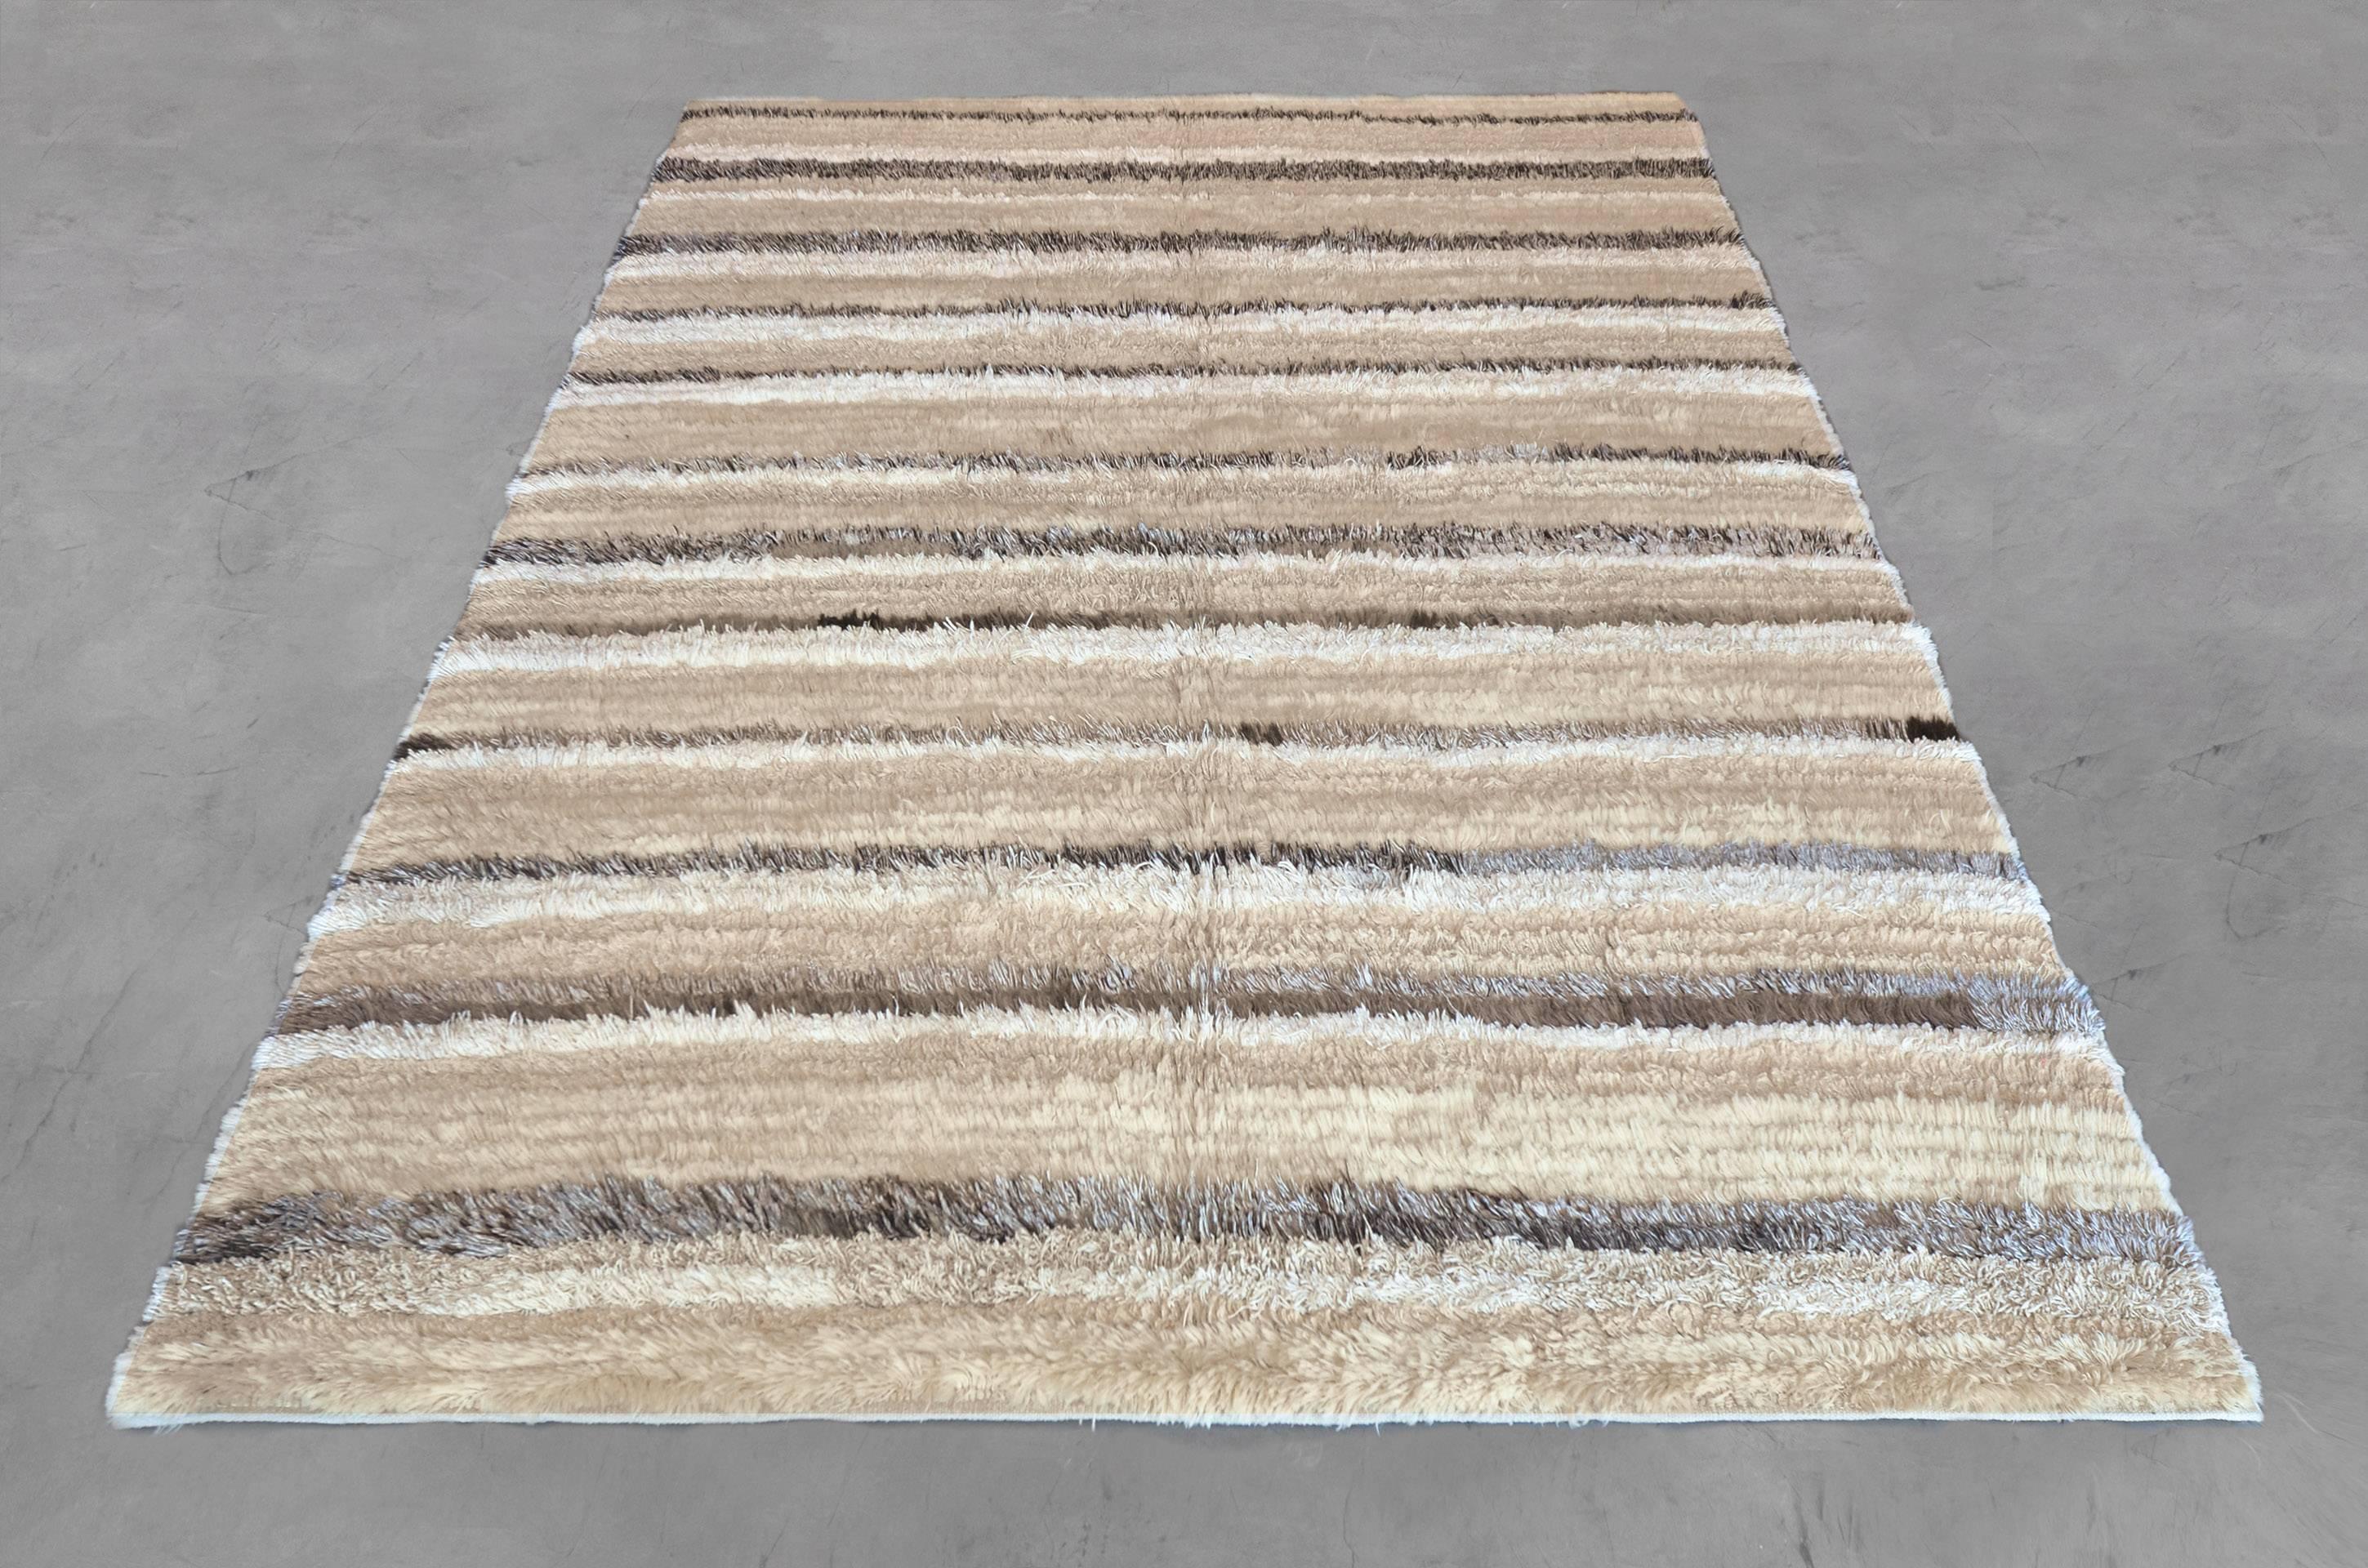 This exceptionally unique long pile rug from Turkey is hand-knotted from the finest wool, hemp, linen, and goat hair. The Minimalist inspired design of this rug is crafted by horizontally layering these complementing materials. Sized at 7’2” x 9’